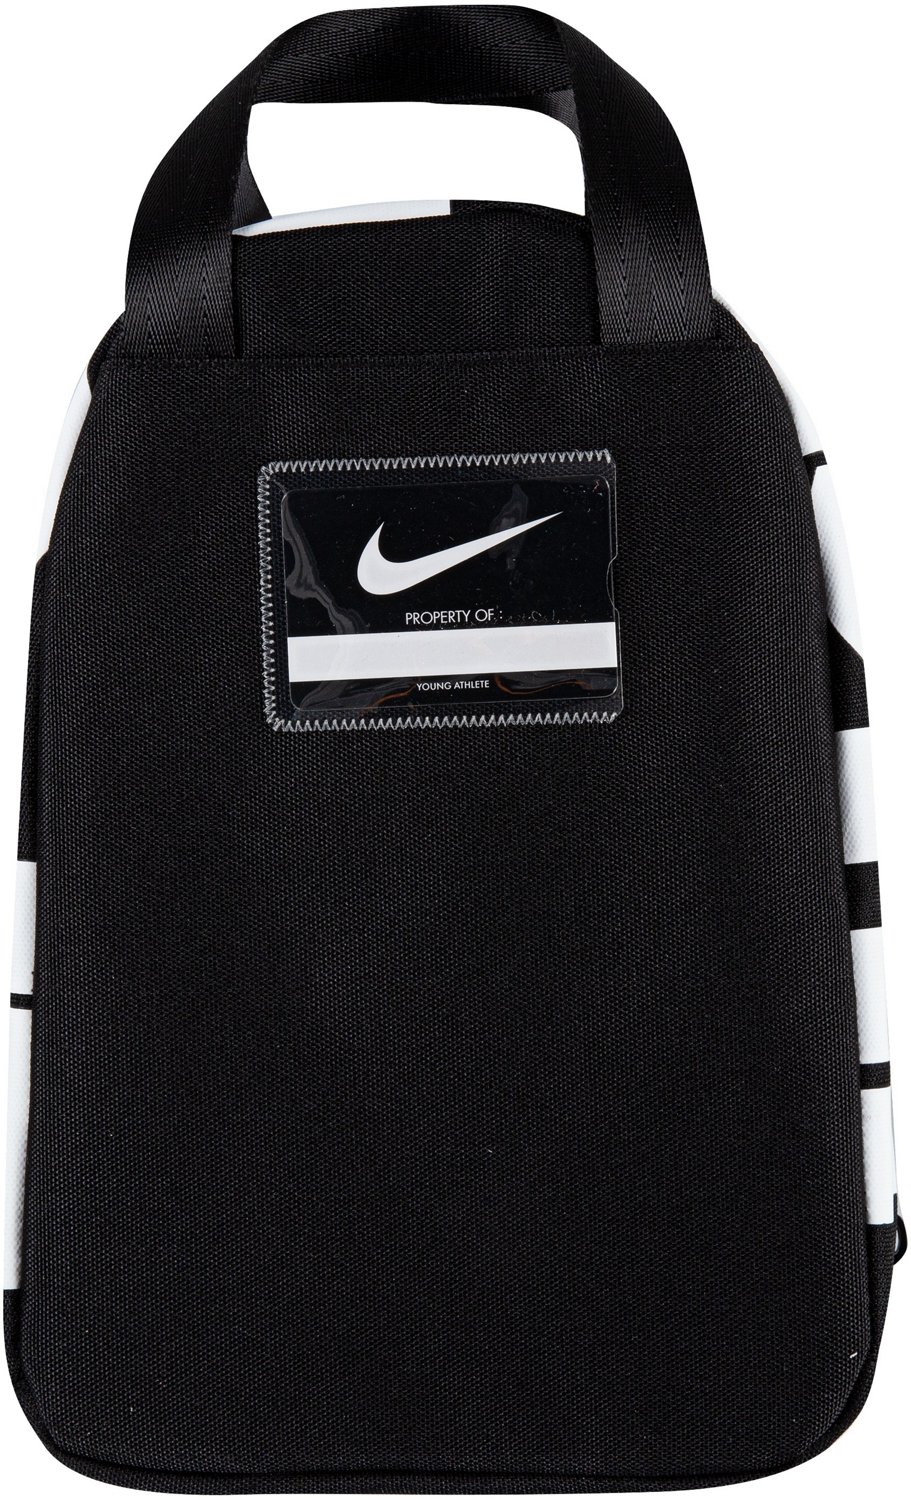 Nike Just Do It Fuel Pack Lunch Bag | Academy